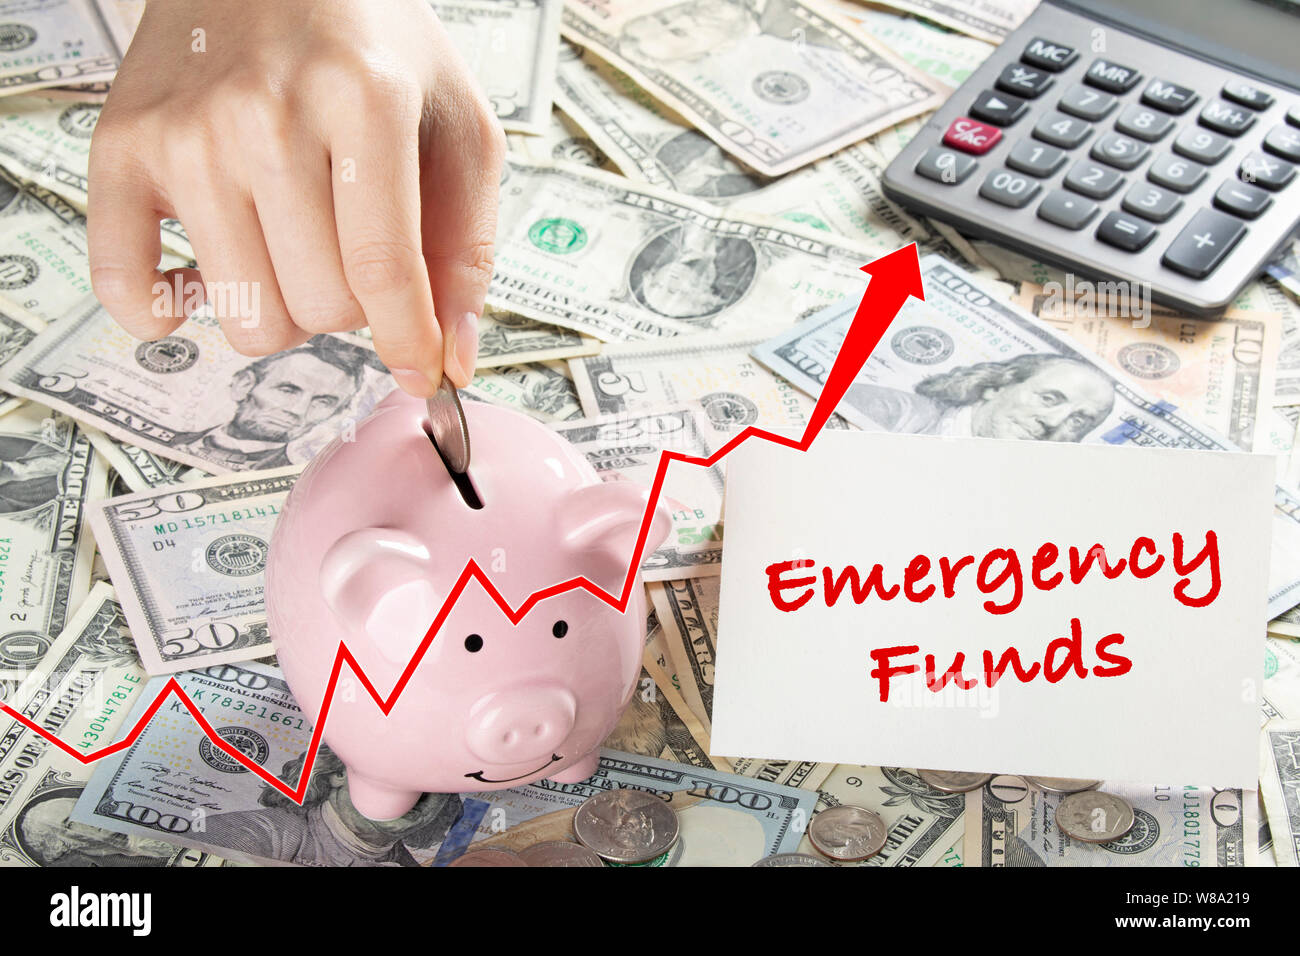 United States bank notes and coins with a calcultor, piggy bank, and hand placing coin into piggy bank and a card that says Emergency Funds Stock Photo